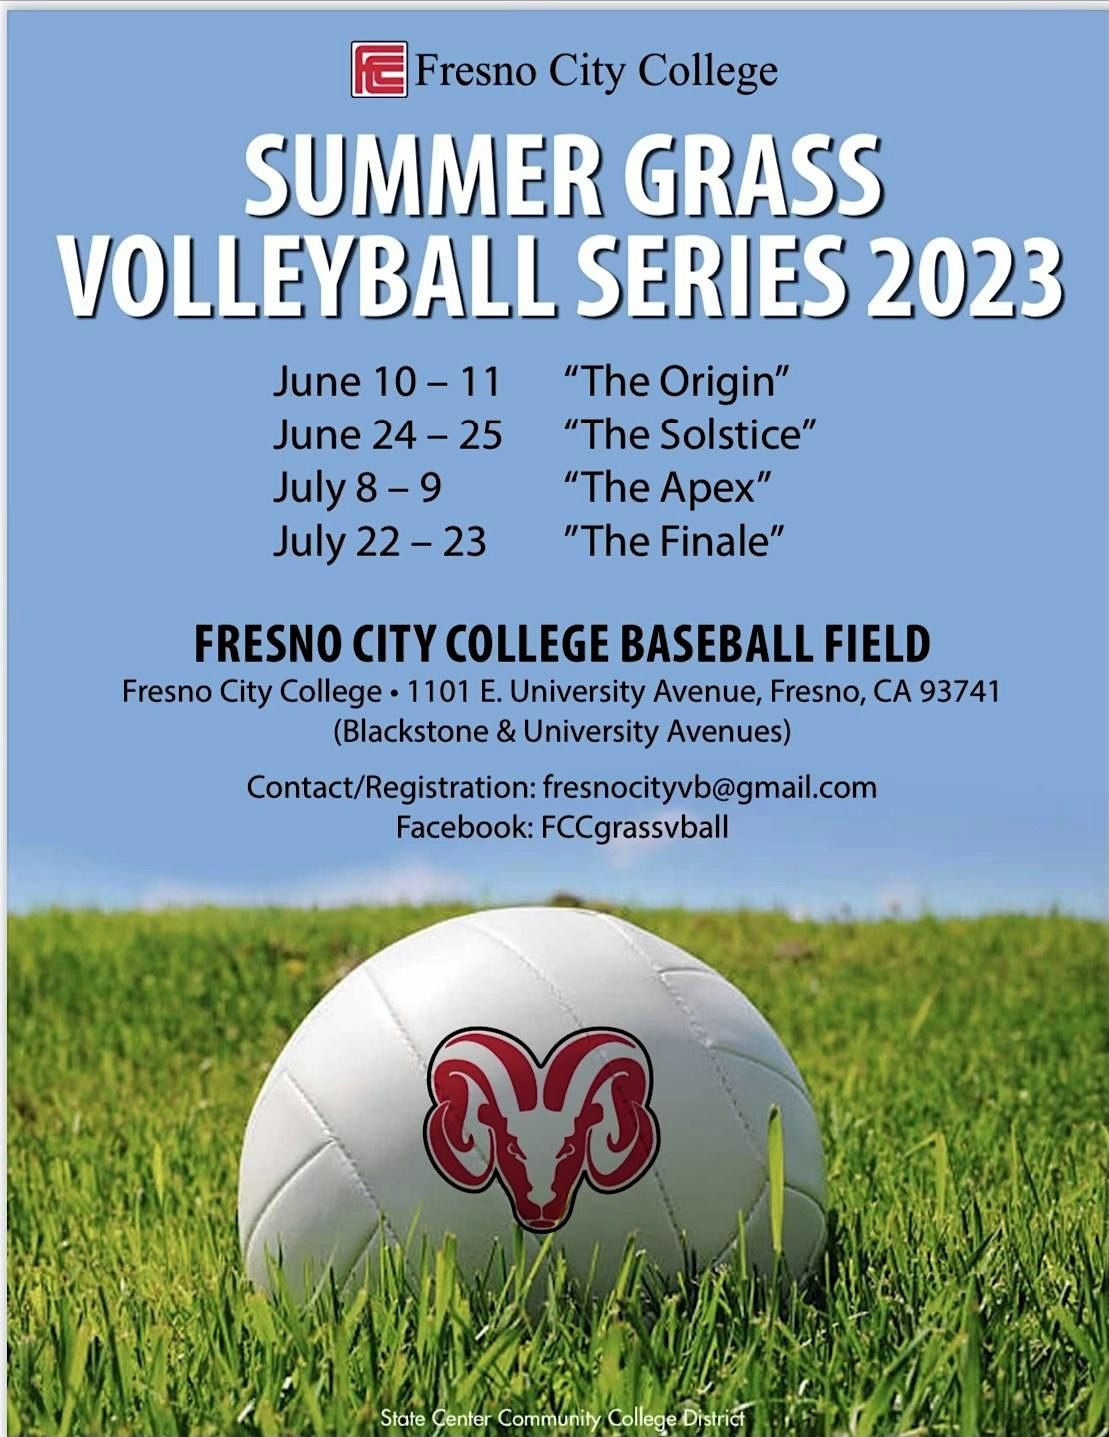 Summer Grass Volleyball Series - "The Apex" (Co-Ed)